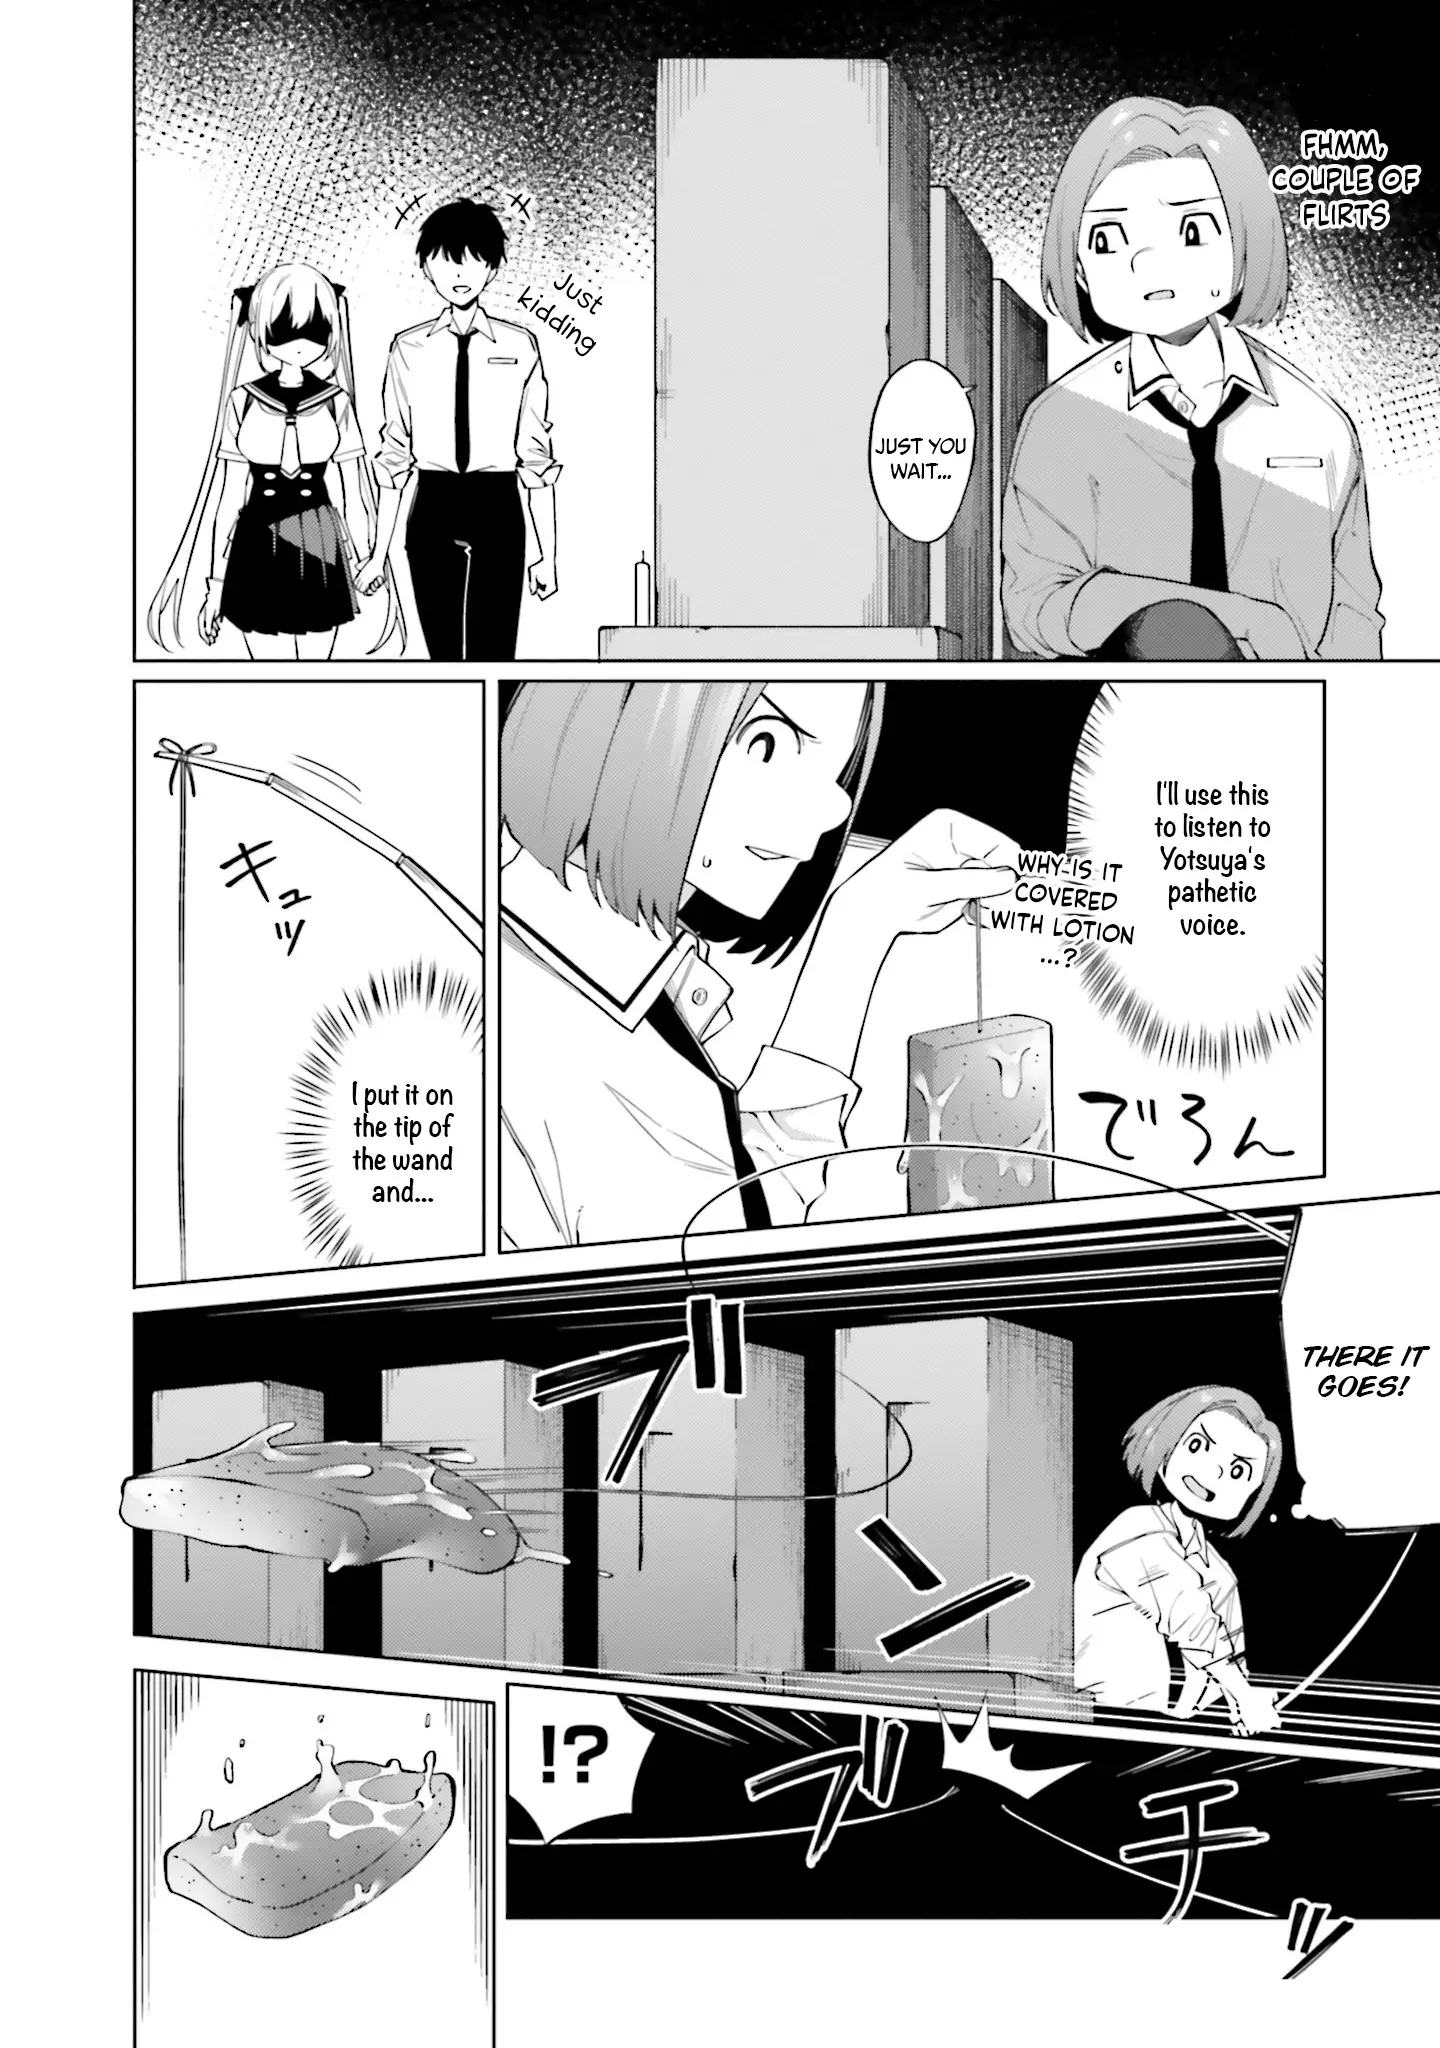 I Don't Understand Shirogane-San's Facial Expression At All - 12 page 11-3122dc28